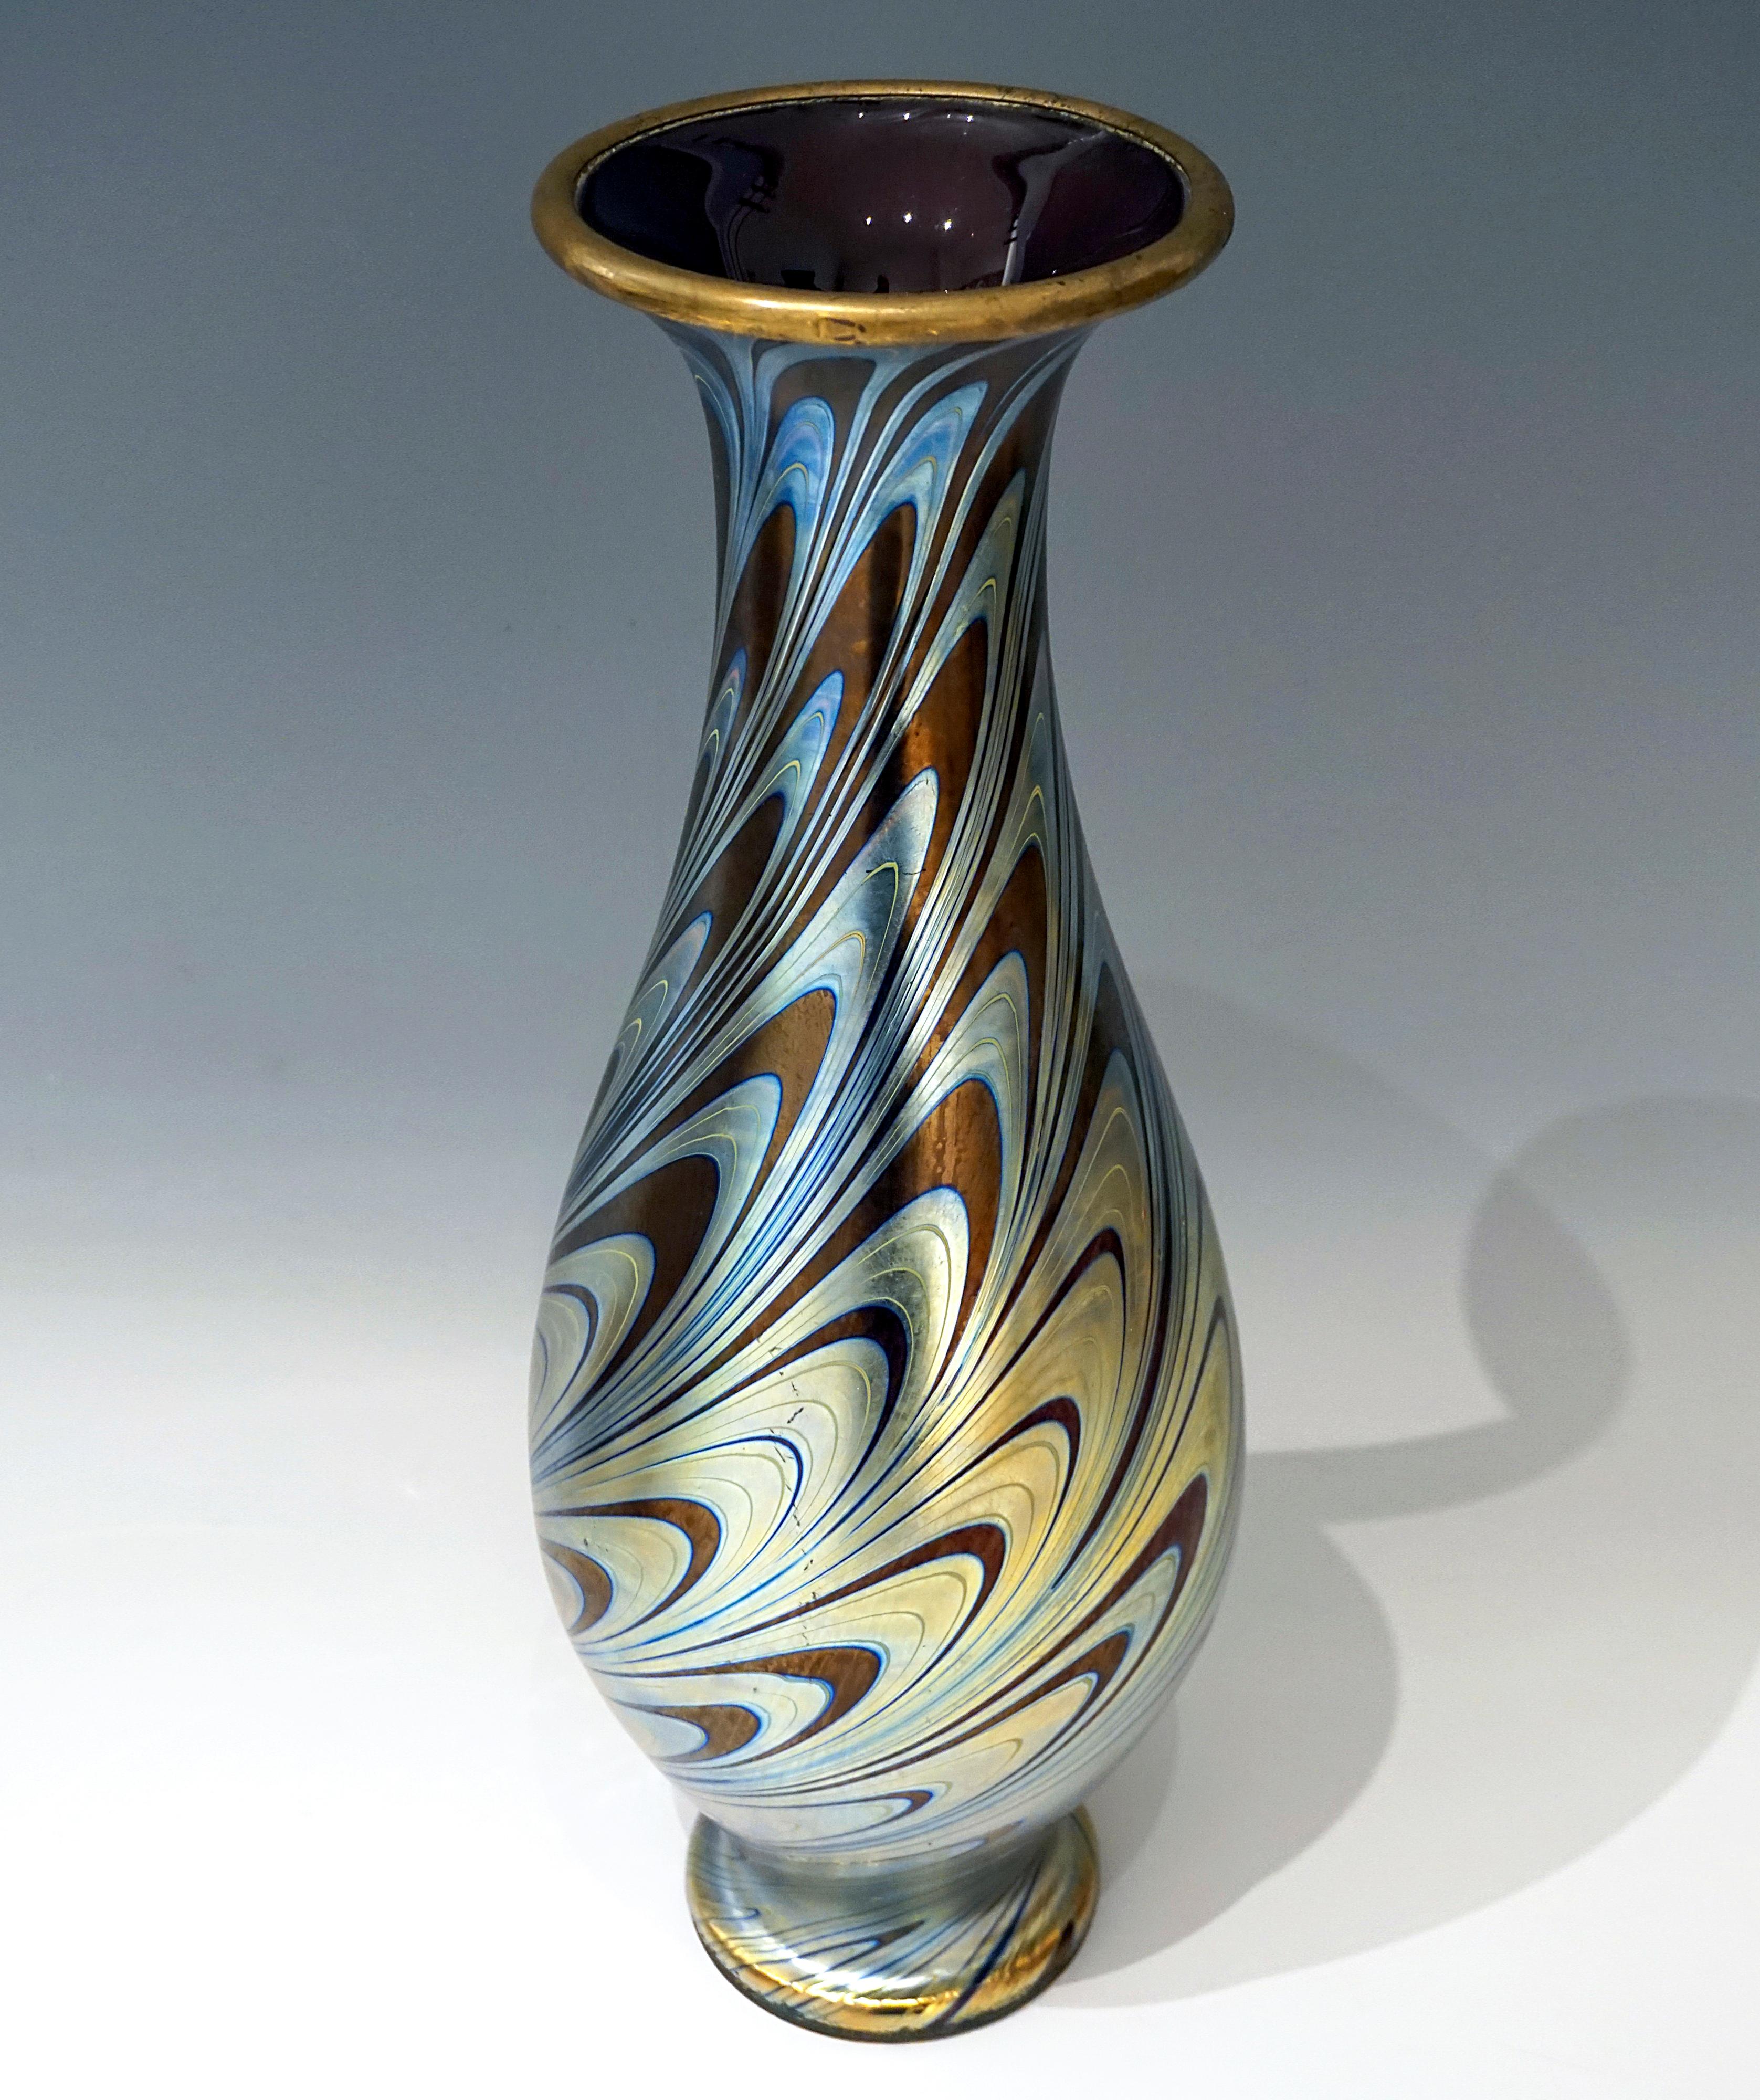 Hand-Crafted Large Loetz Art Nouveau Vase, Ruby Phenomenon Gre 7624, Austria-Hungary, Ca 1898 For Sale